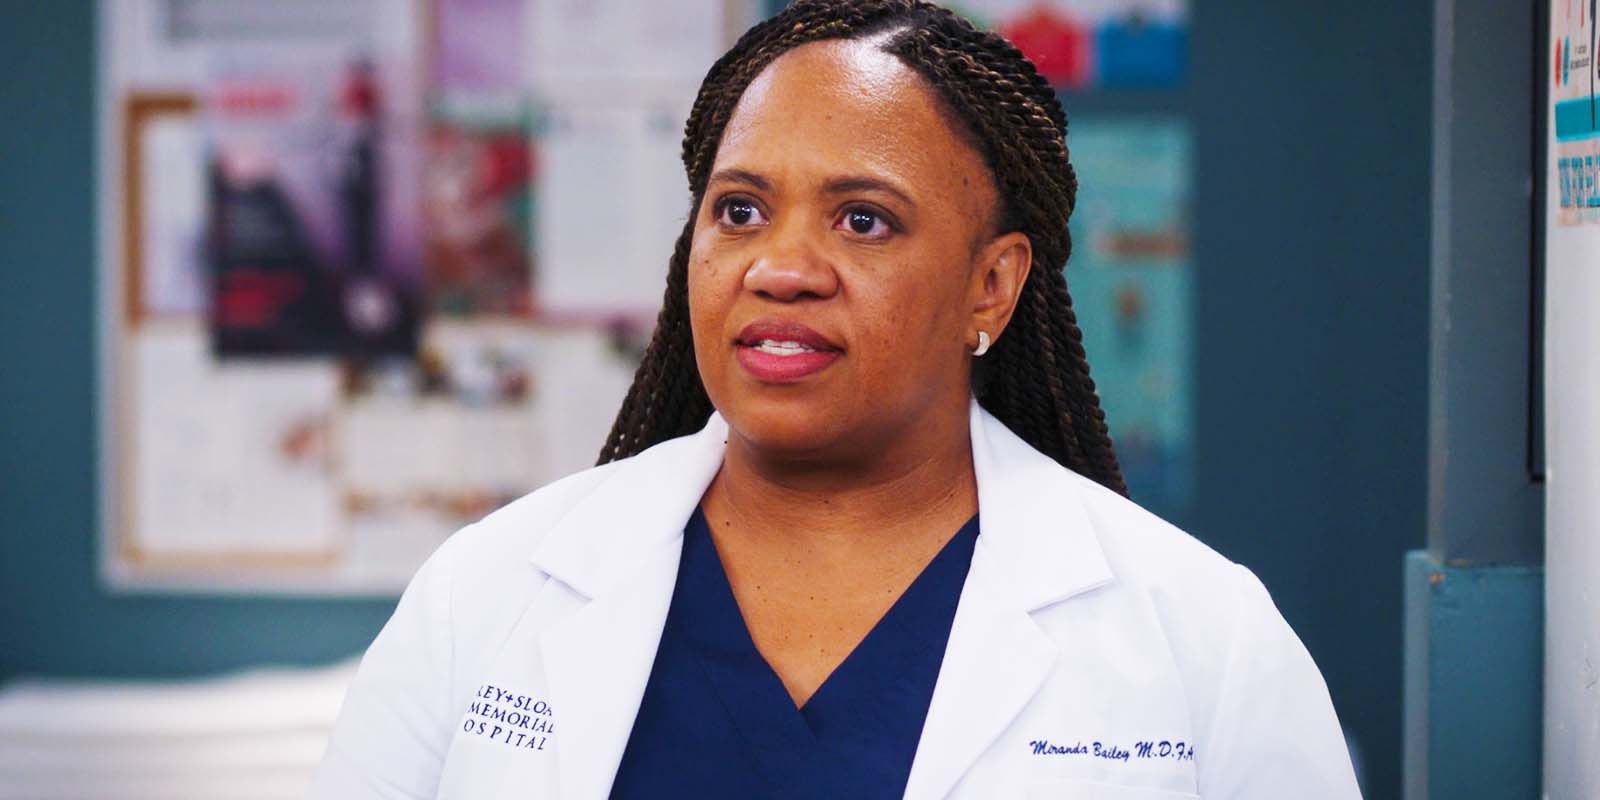 Greys Anatomy Has Finally Found Its Cristina Yang Replacement After 10 Years